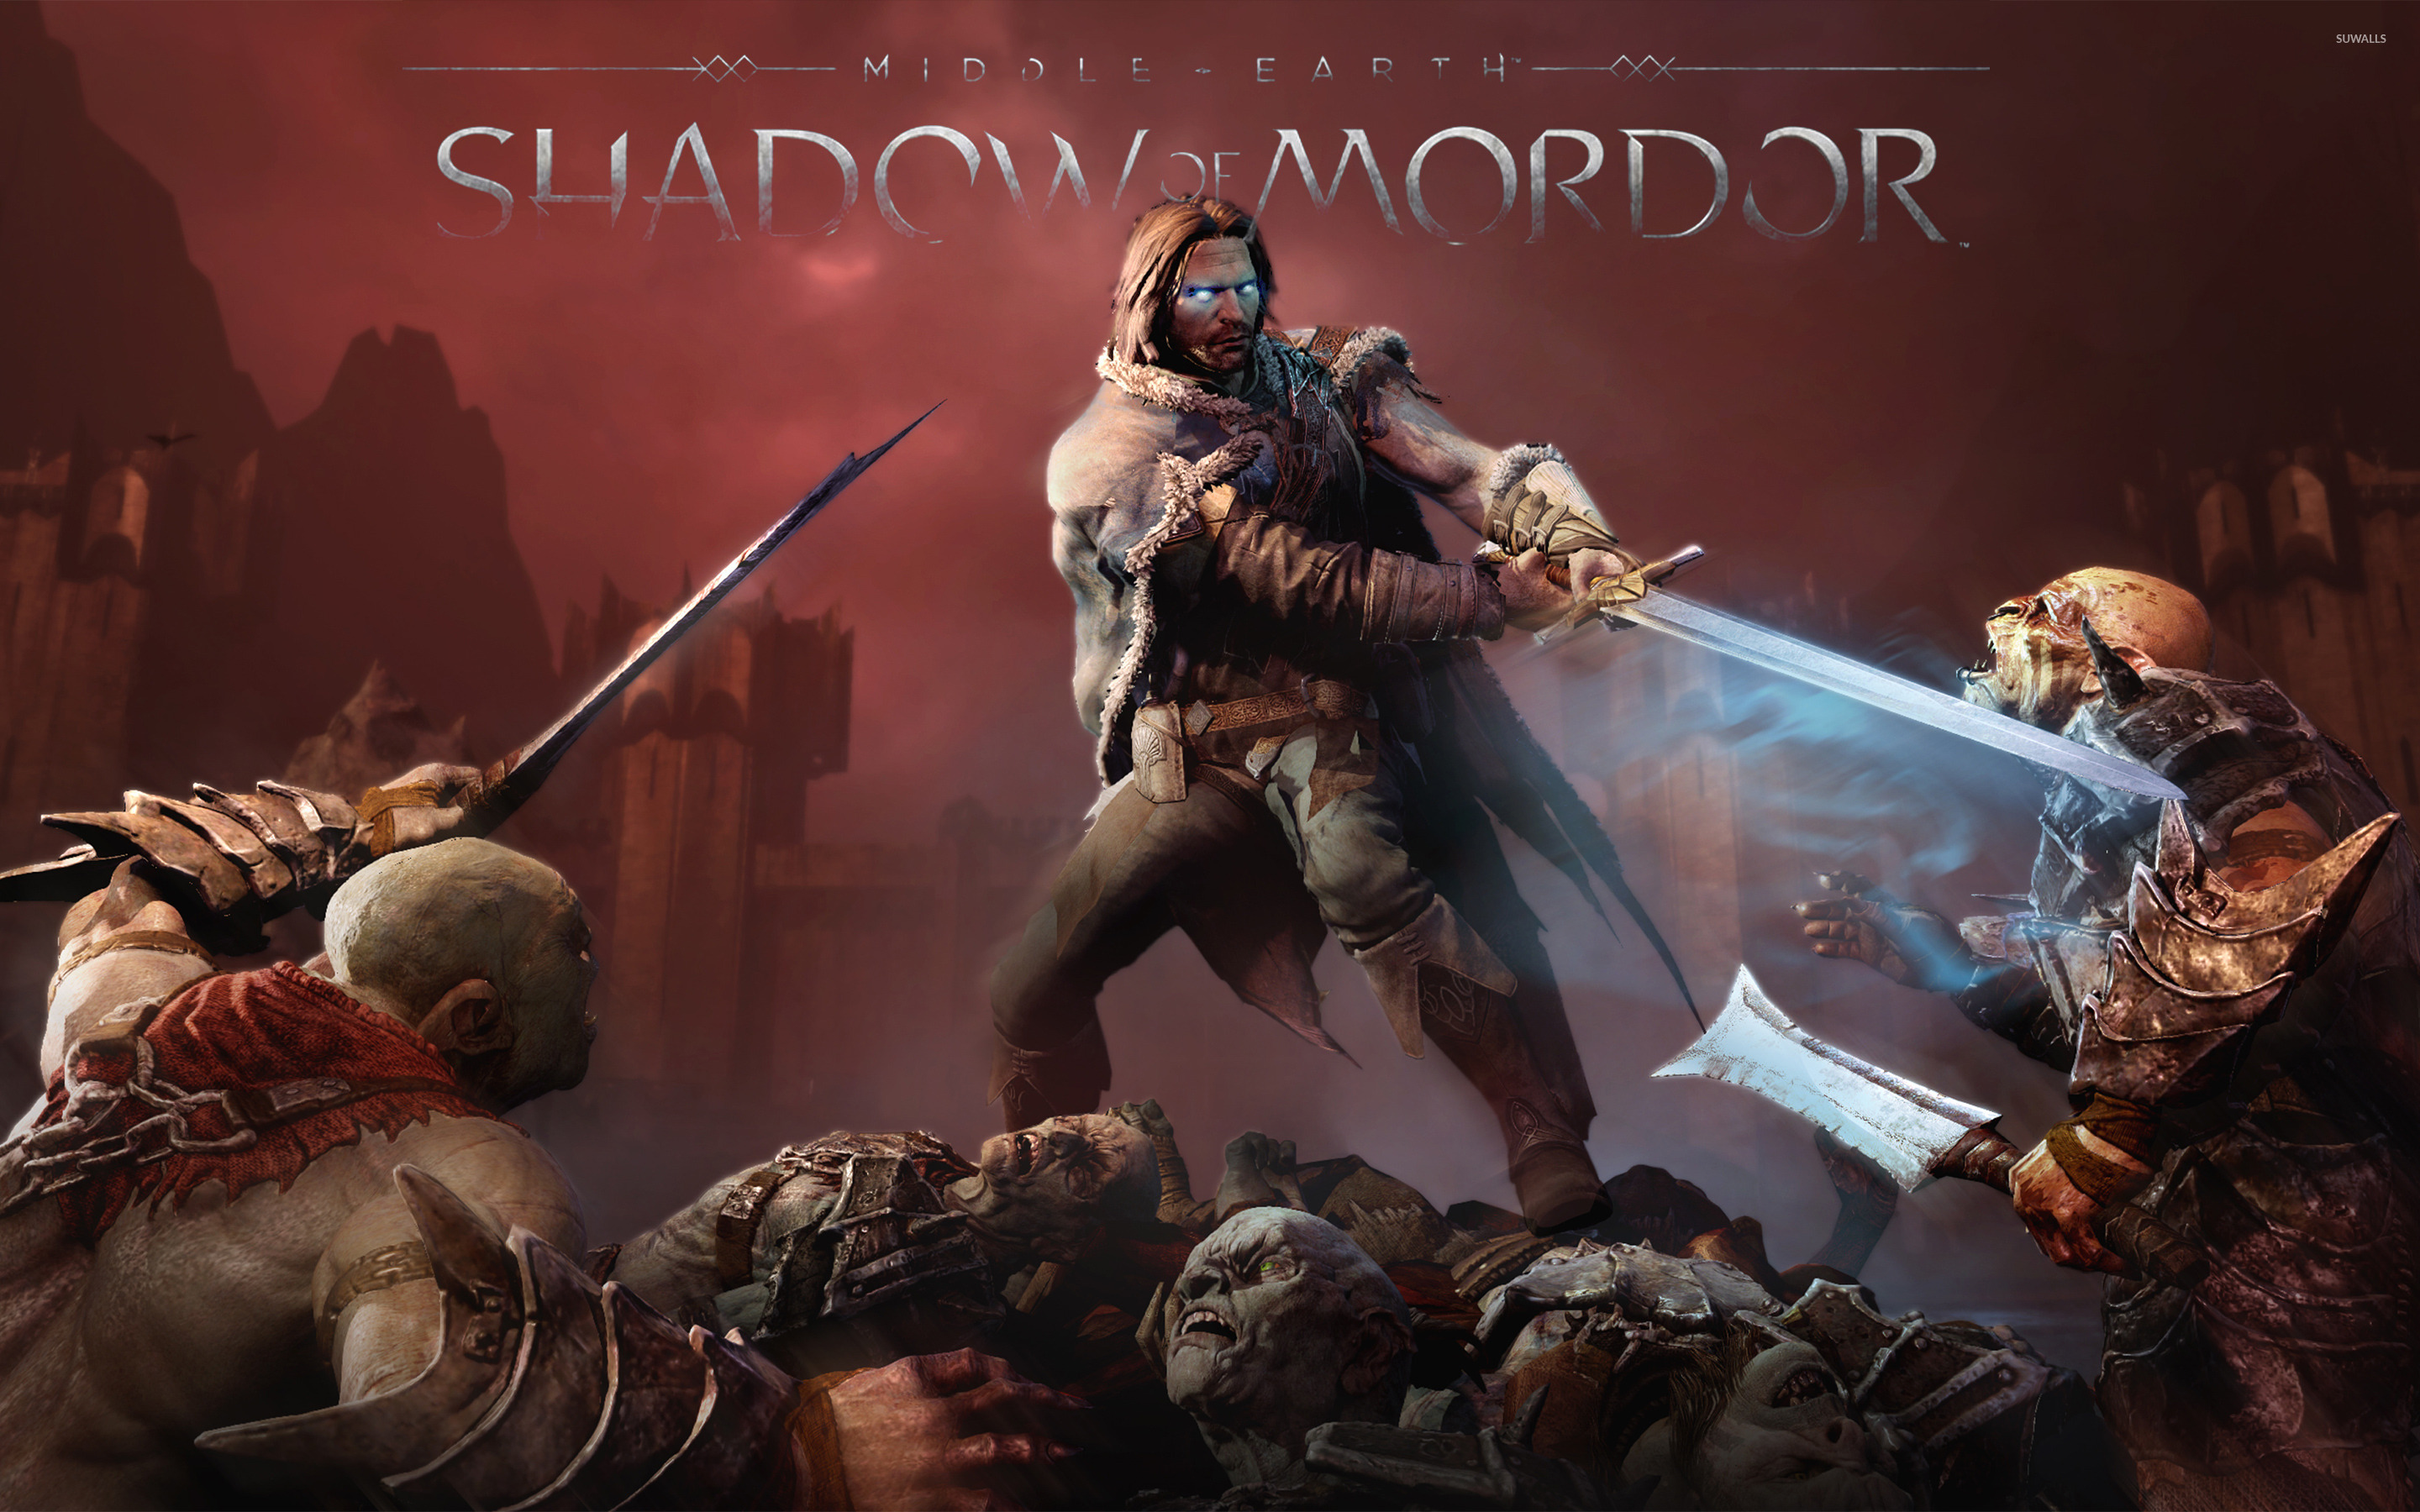 Middle-earth: Shadow of Mordor [5] wallpaper - Game wallpapers - #34038